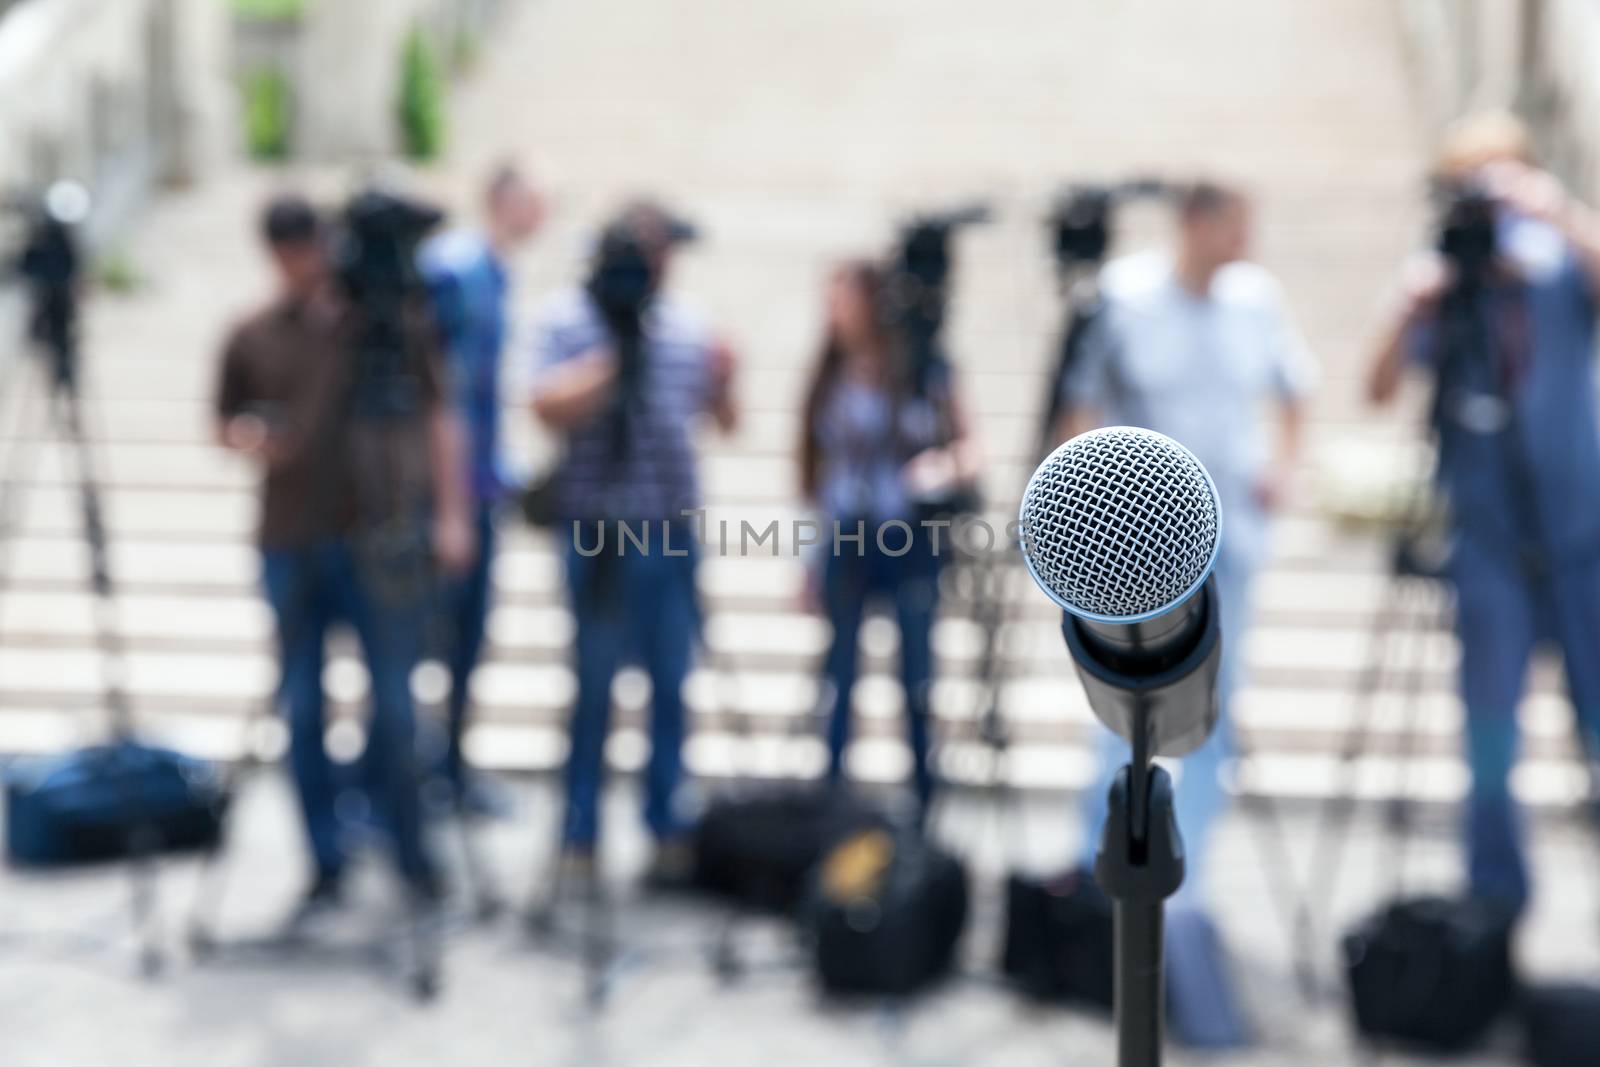 News conference by wellphoto